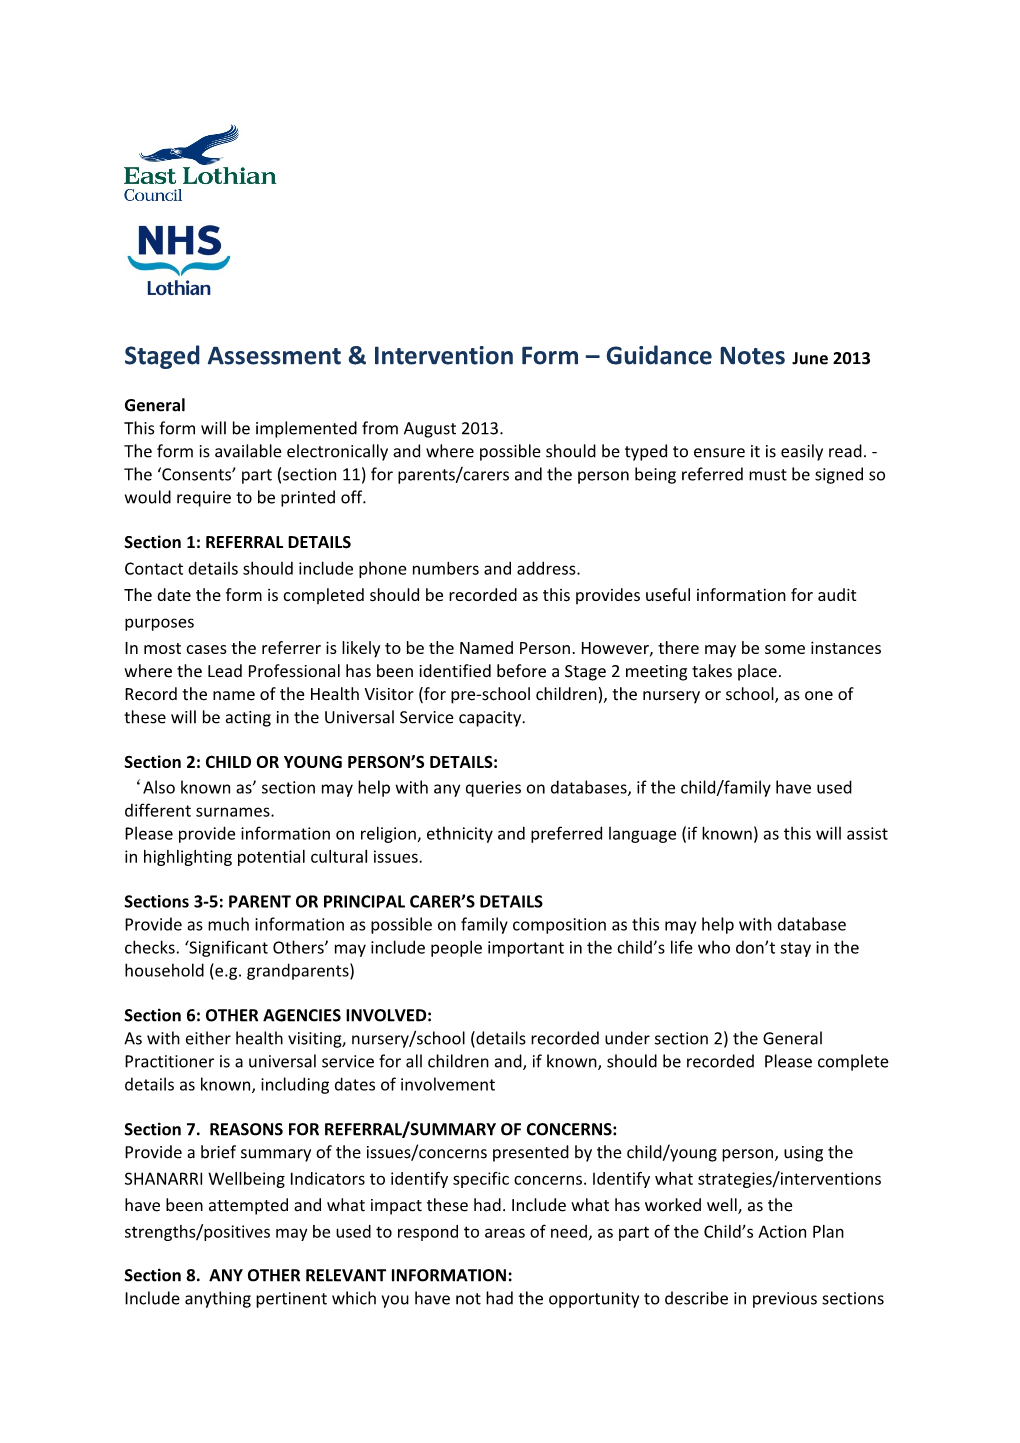 Staged Assessment & Intervention Form Guidance Notes June 2013